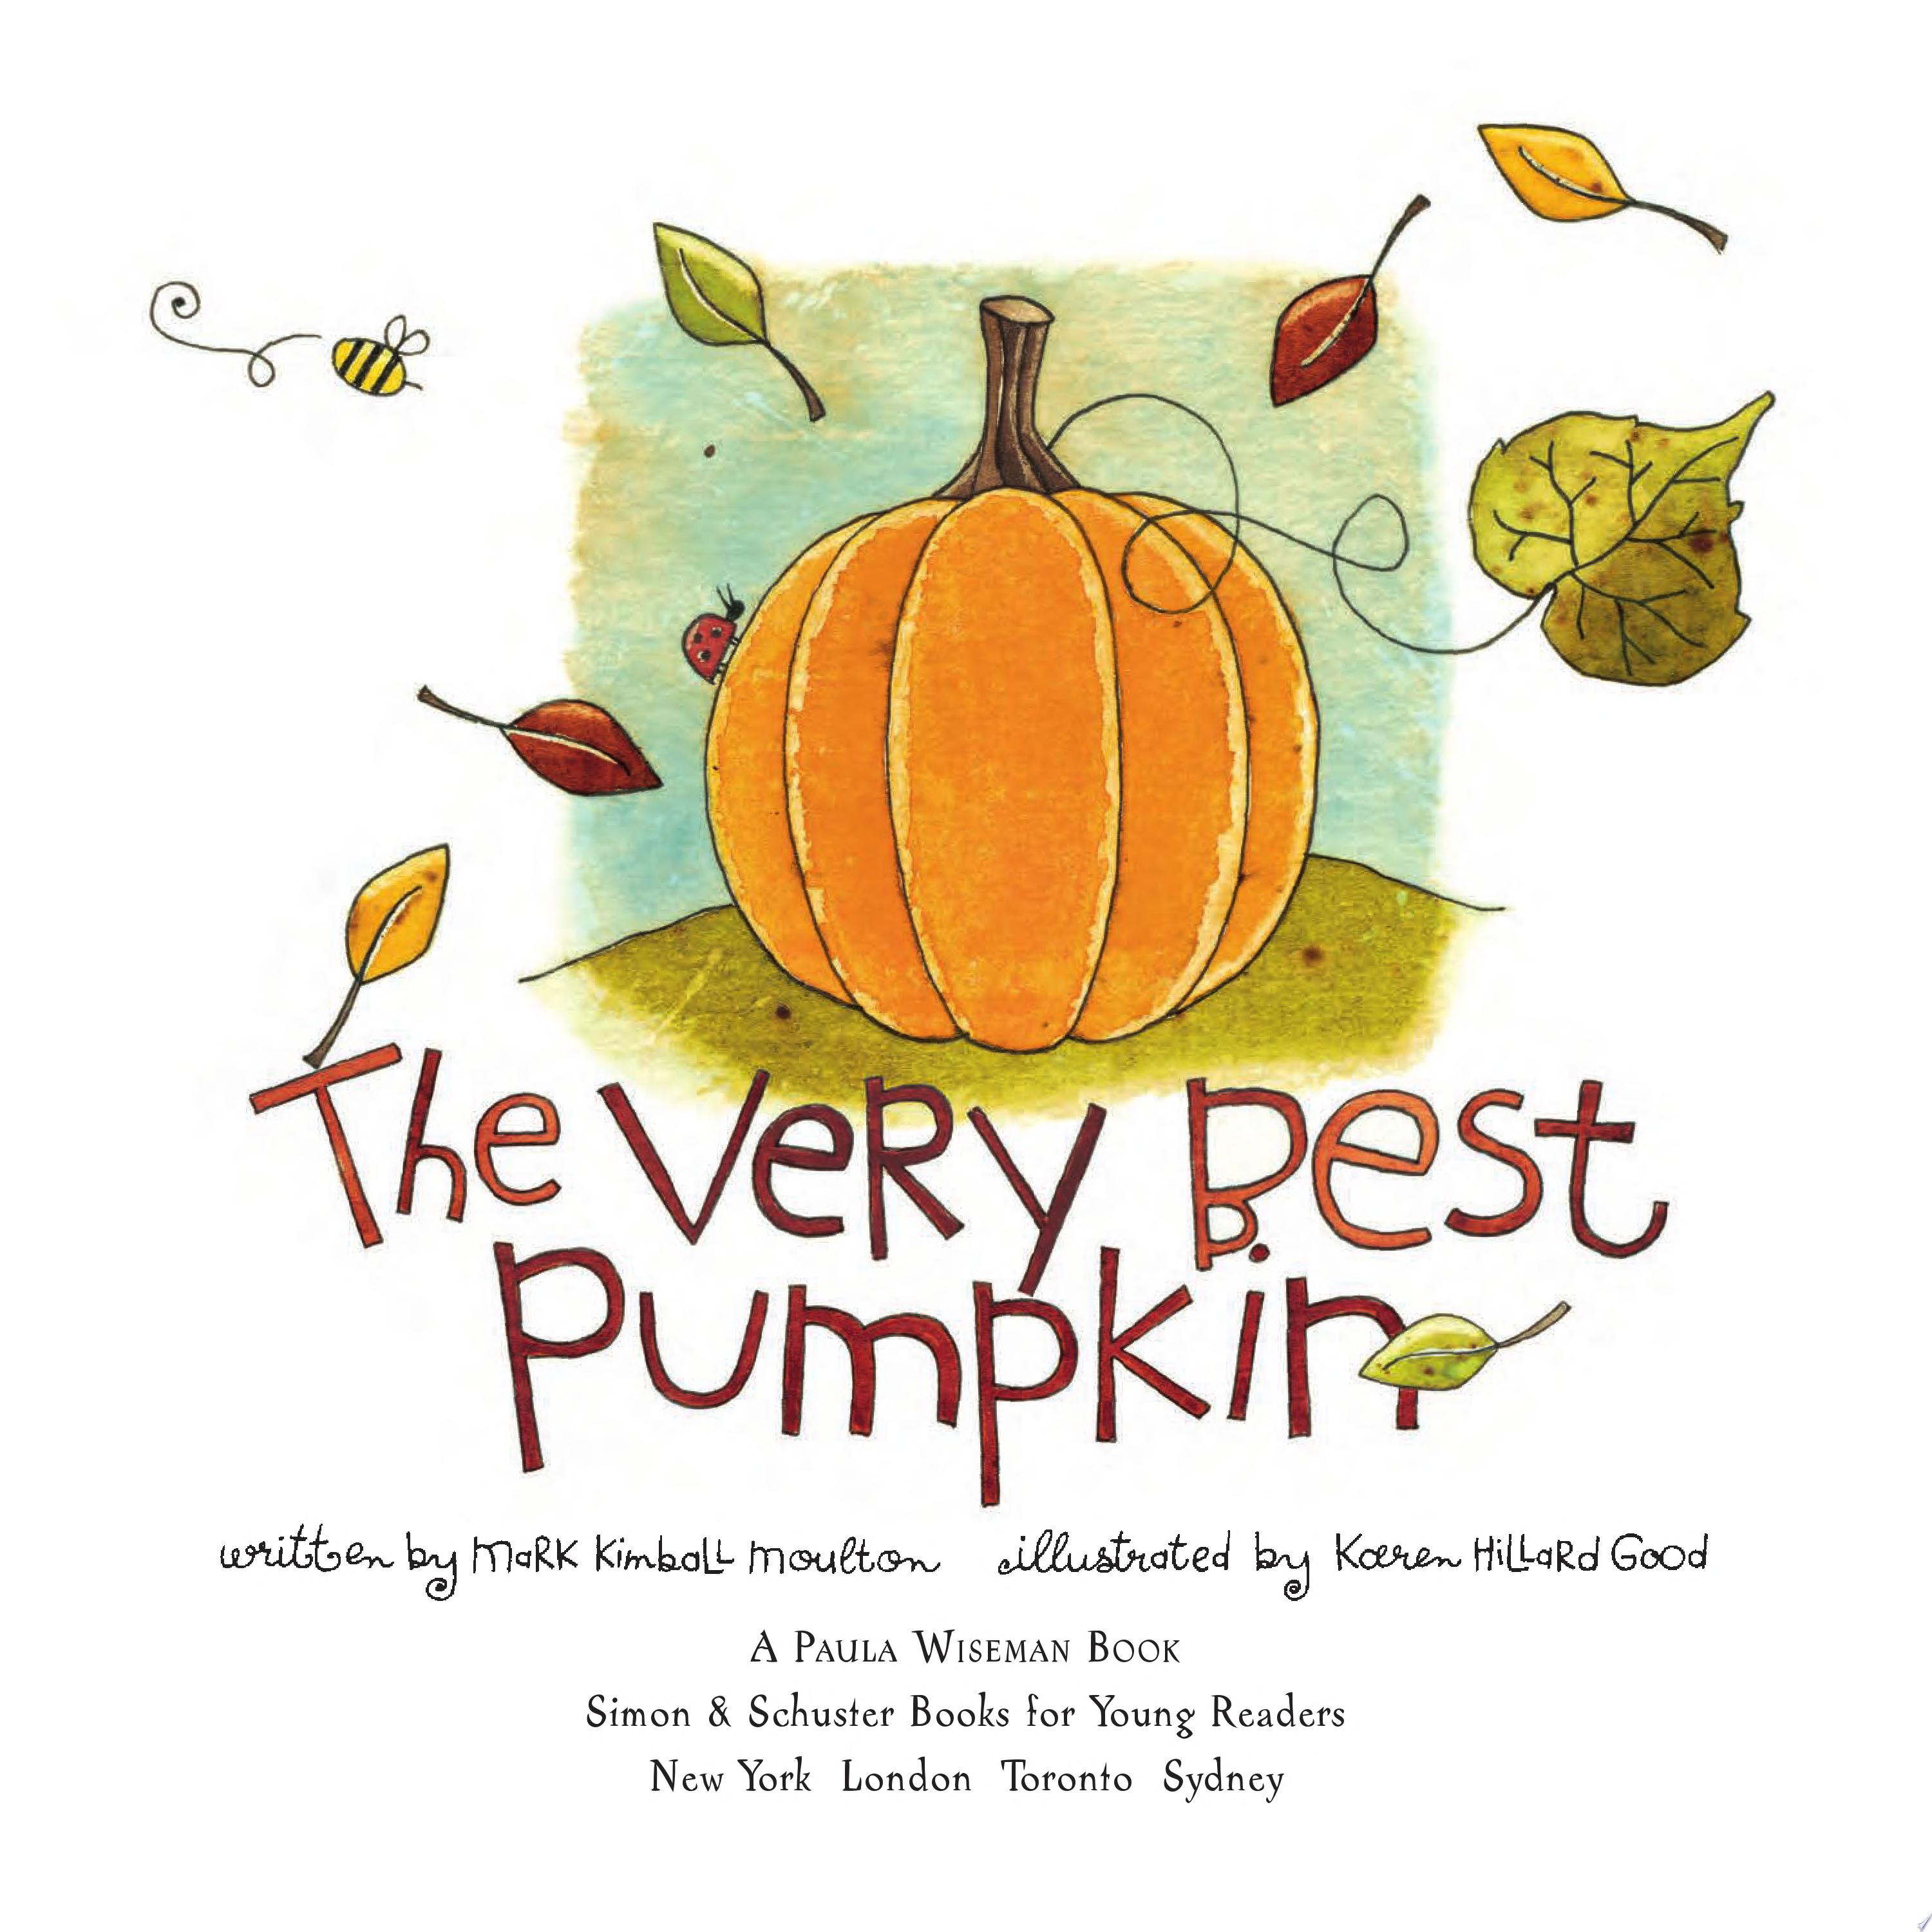 Image for "The Very Best Pumpkin"